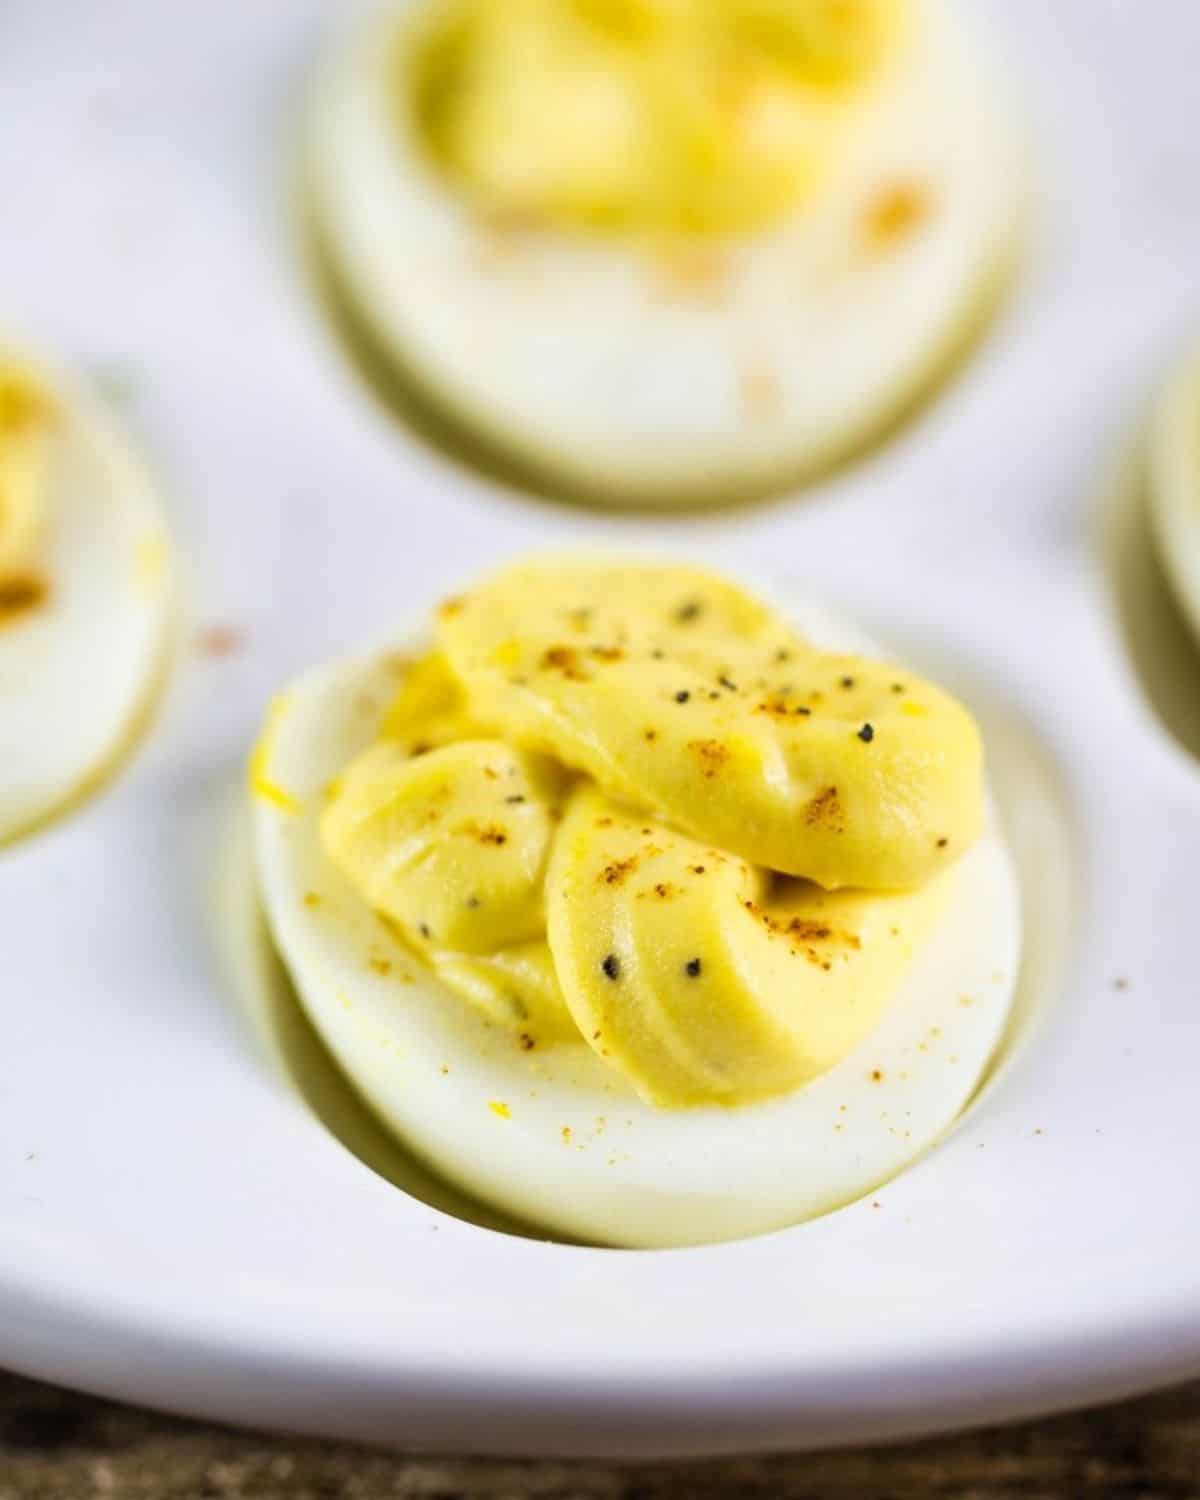 A deviled egg with a horseradish filling is topped with a sprinkle of paprika and cracked black pepper on a white plate.